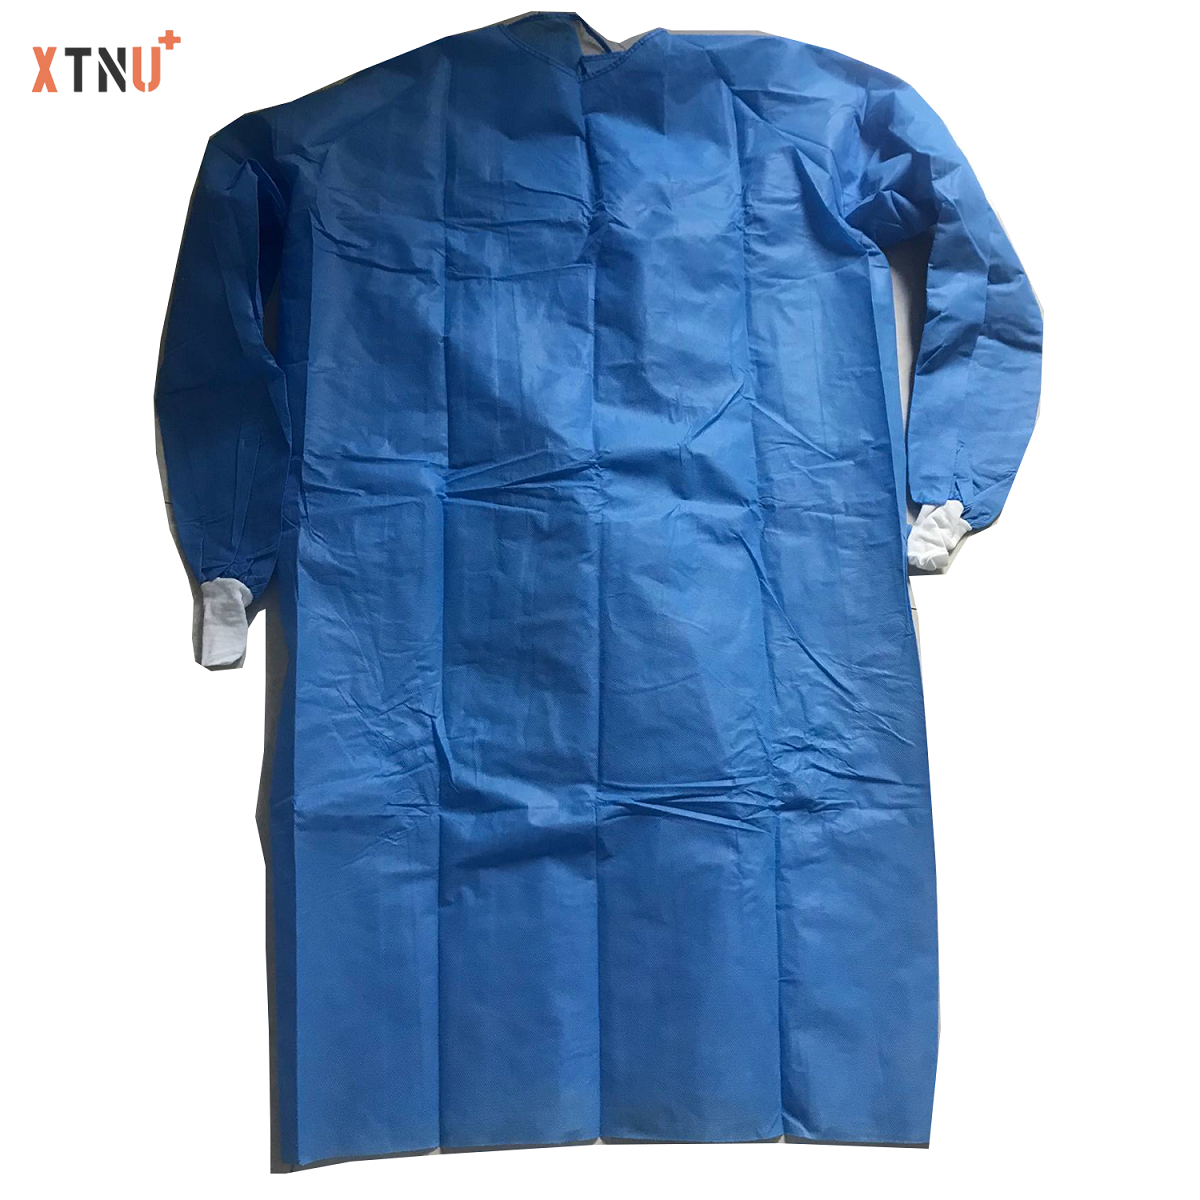 SMS-Surgical-Gown-detail-1.png